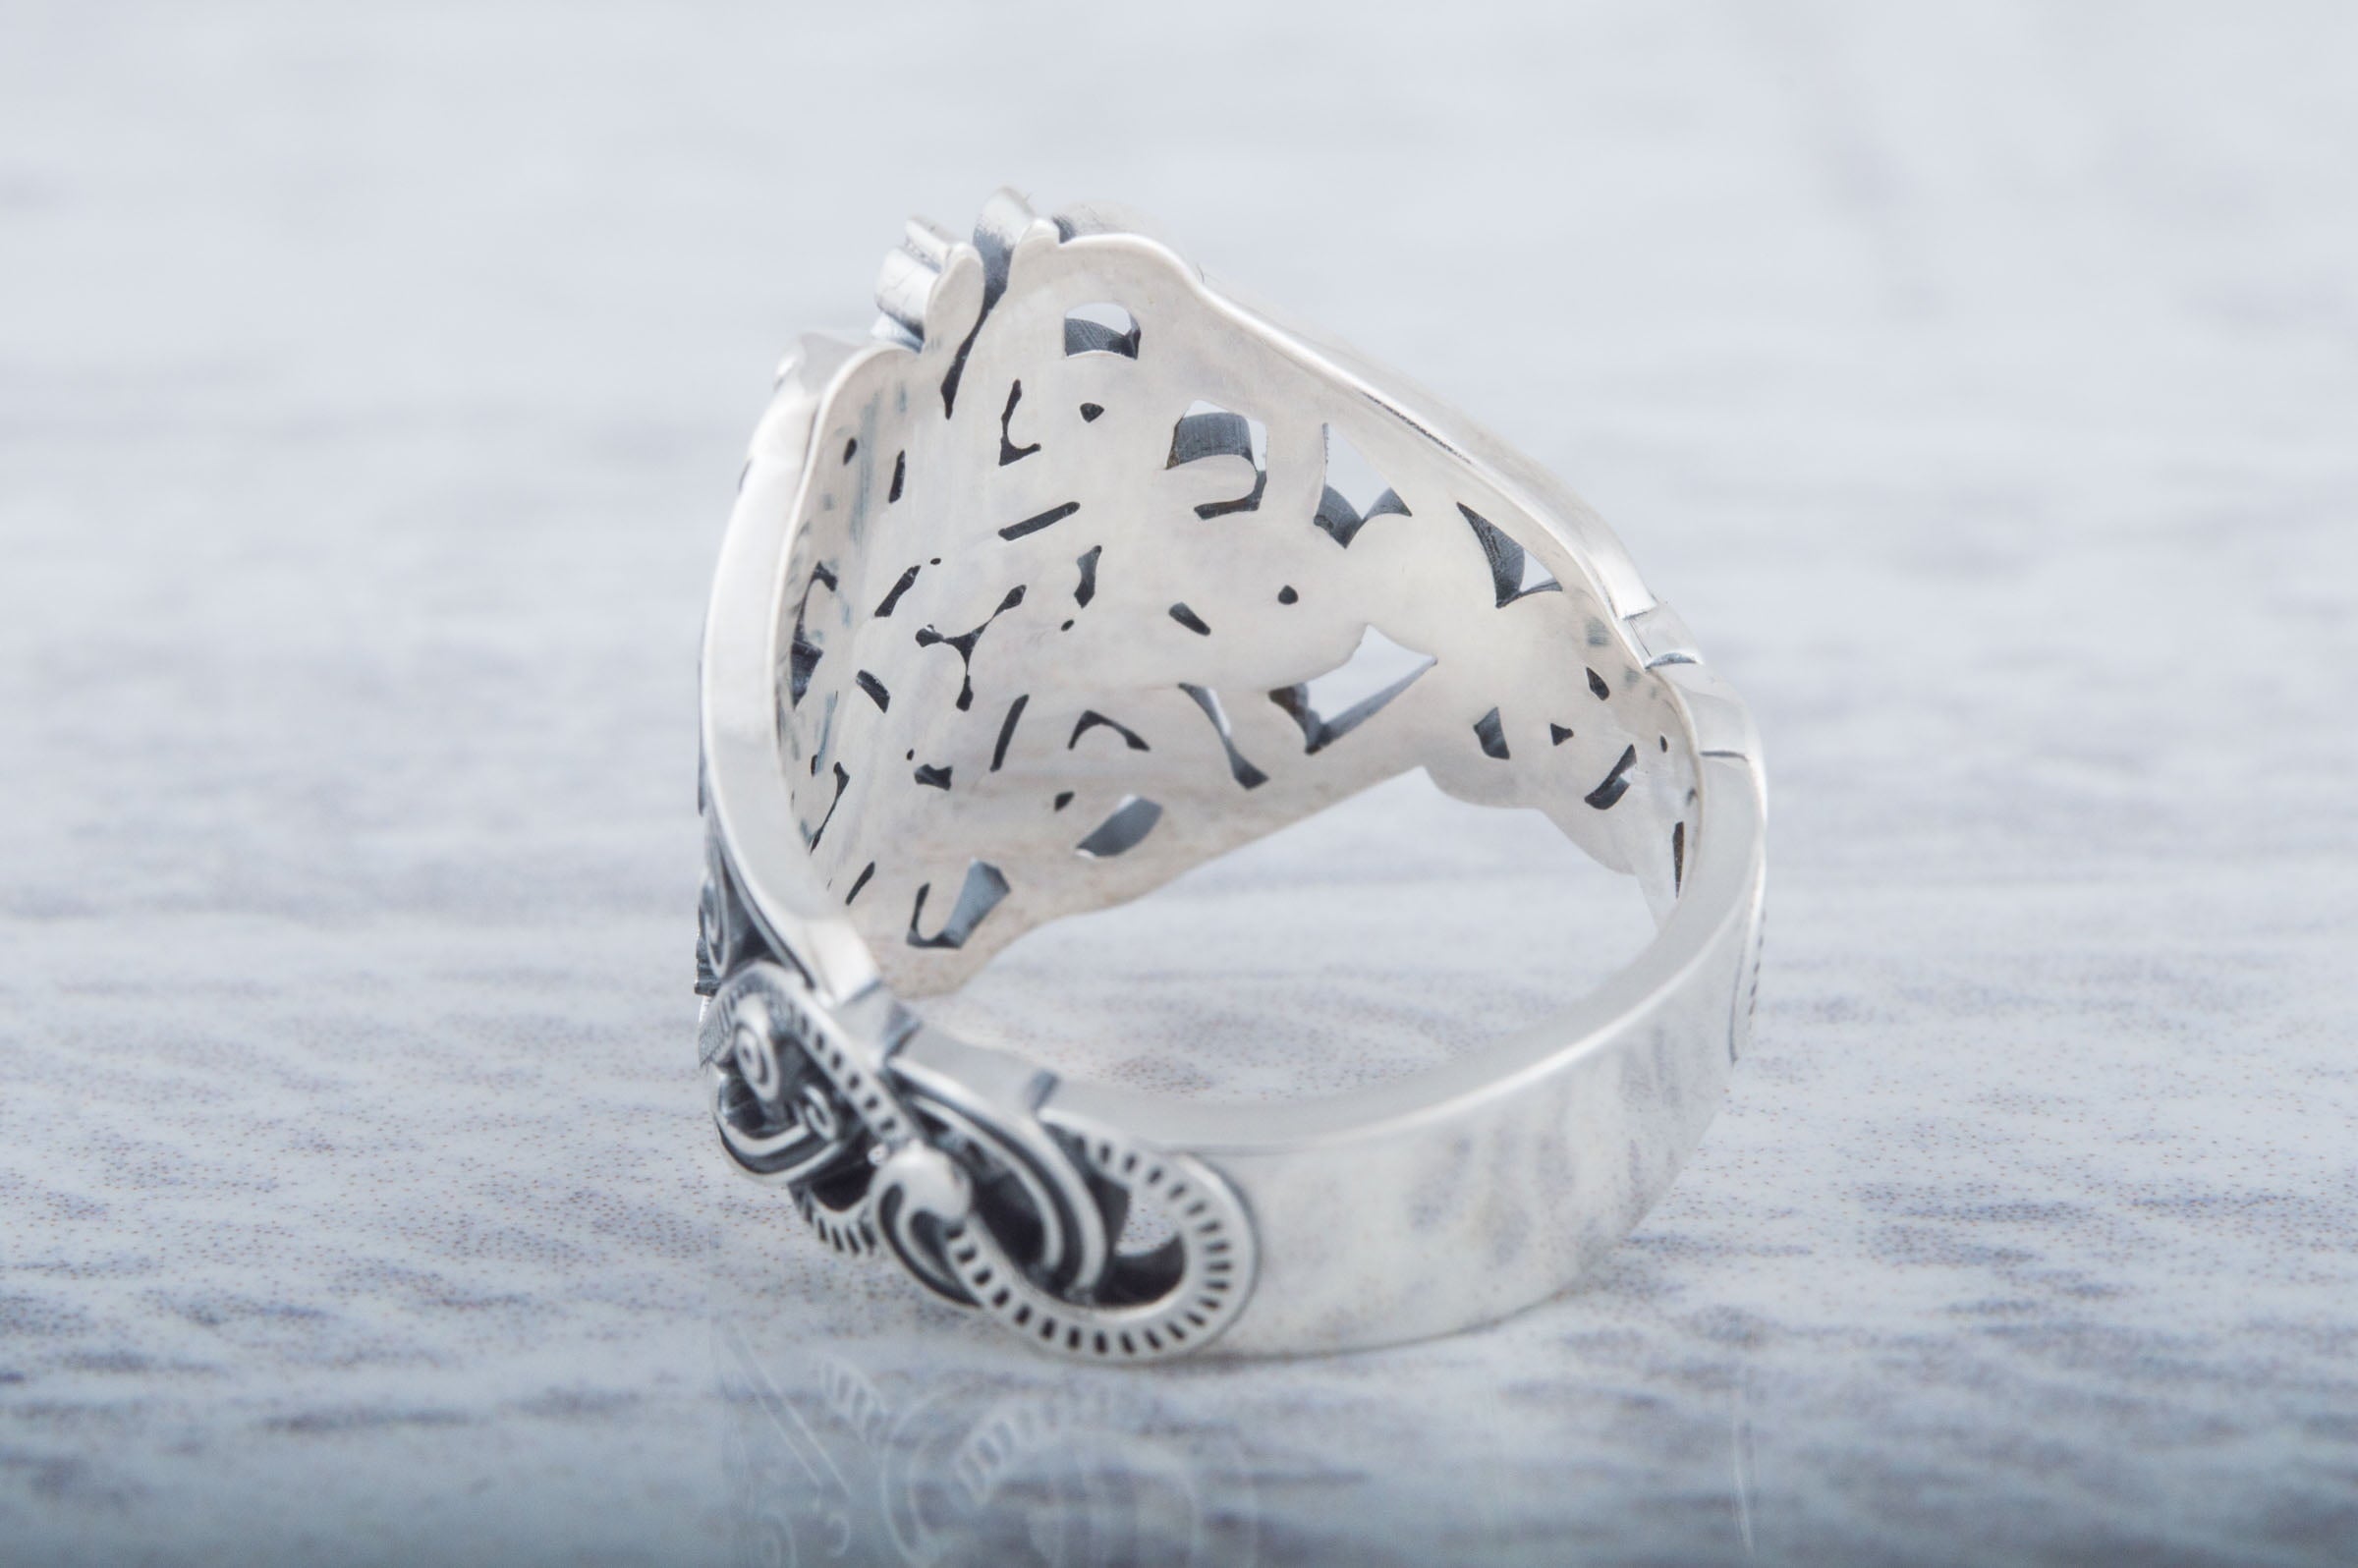 Ring with Ornament Sterling Silver Handmade Jewelry - vikingworkshop